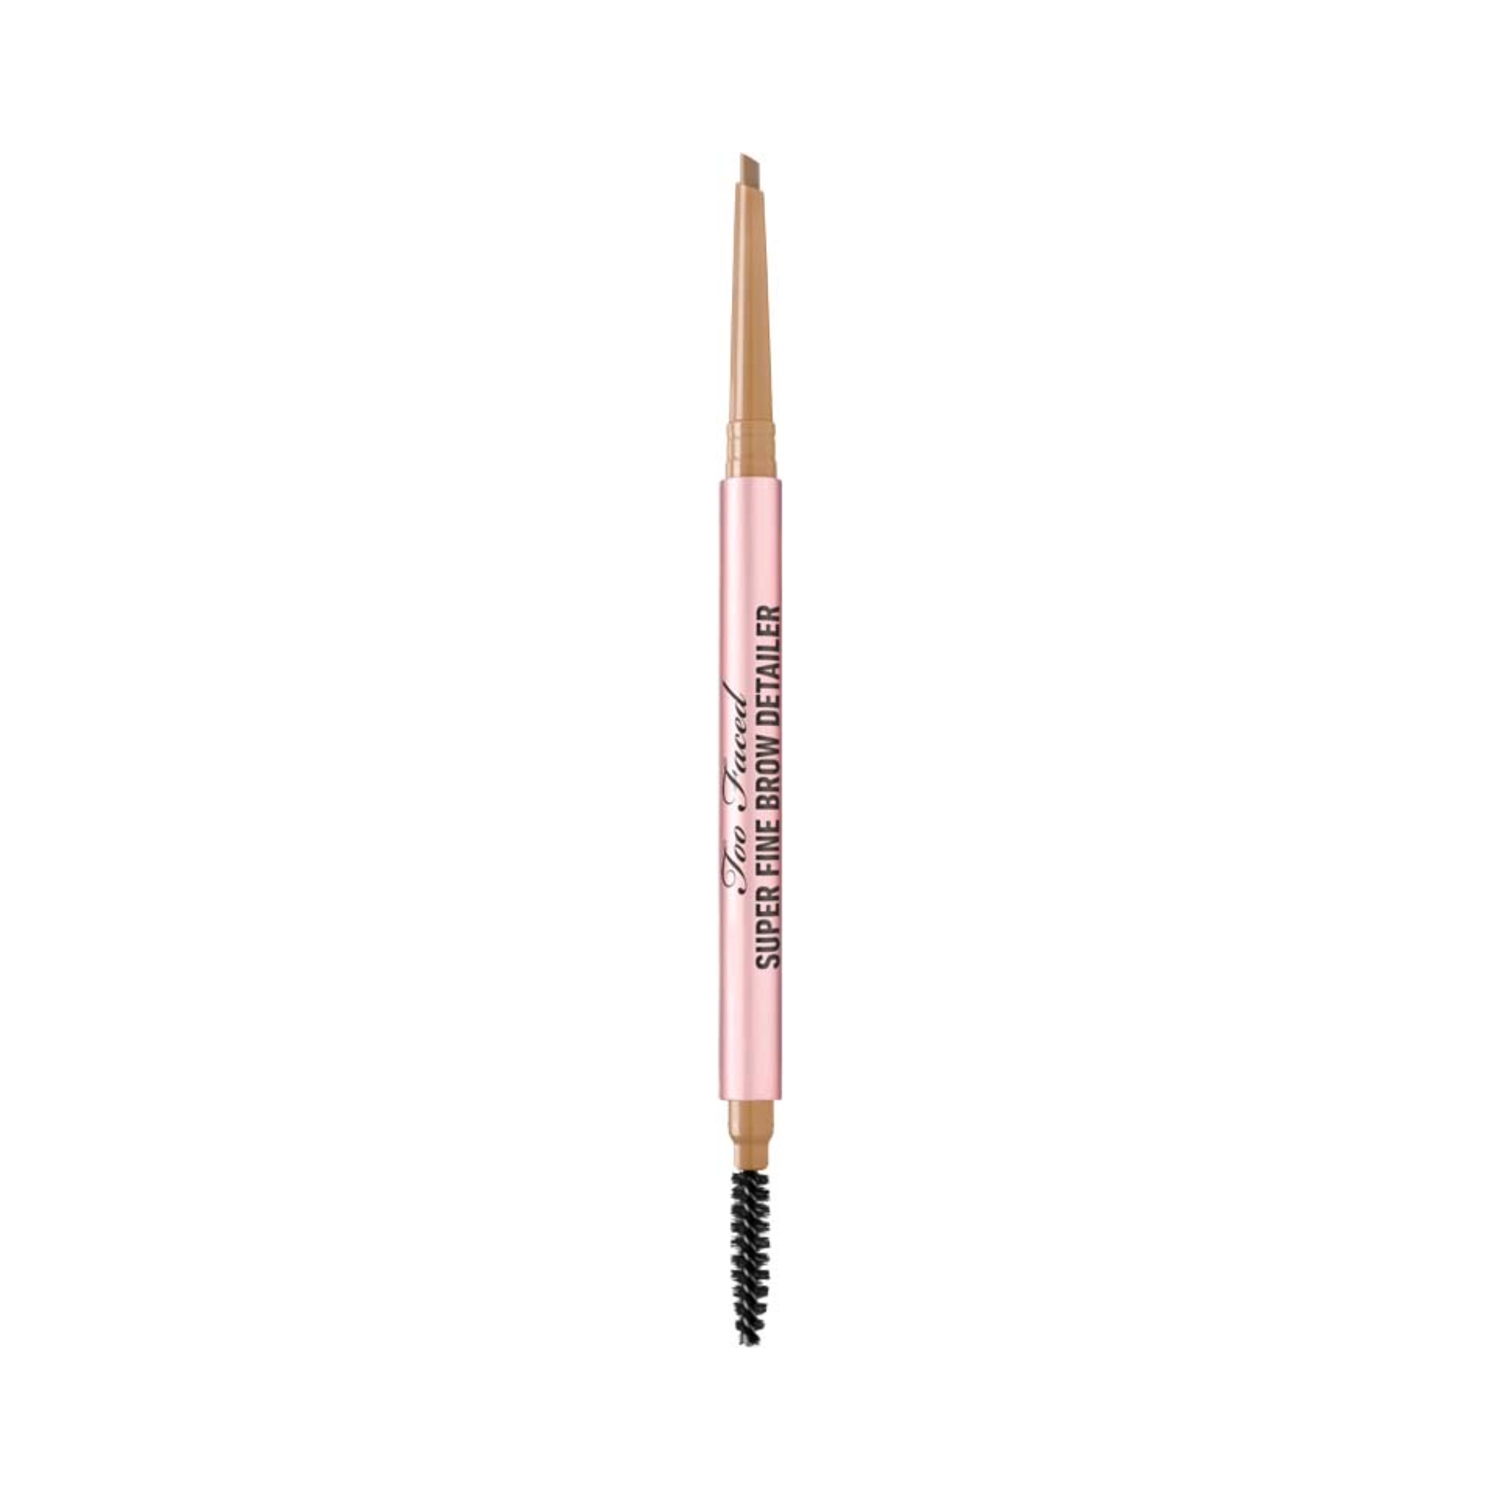 Too Faced | Too Faced Super Fine Brow Detailer - Taupe (0.08g)